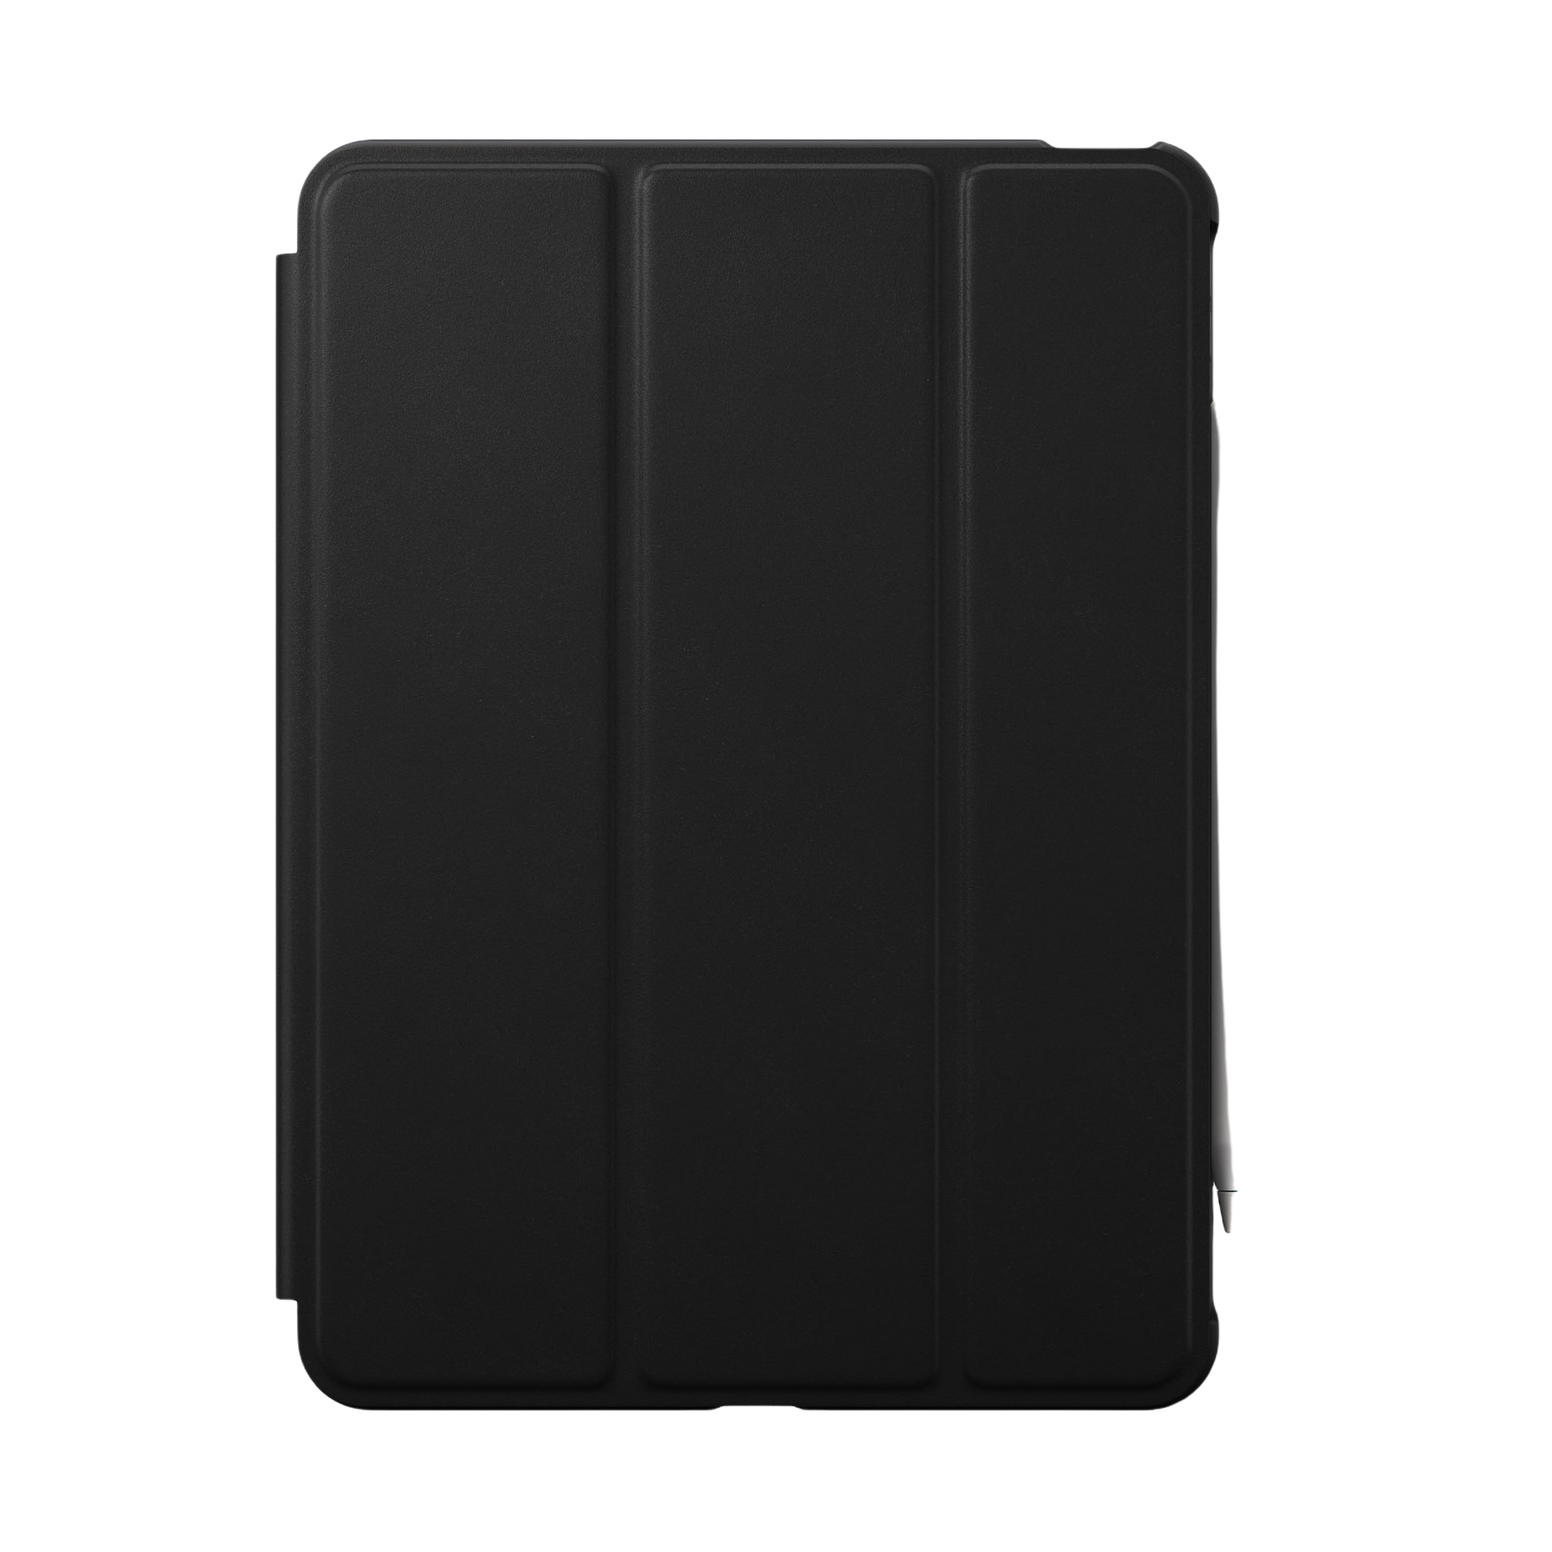 Nomad Modern Leather Folio for iPad Air (4th Gen) - Black - Discontinued